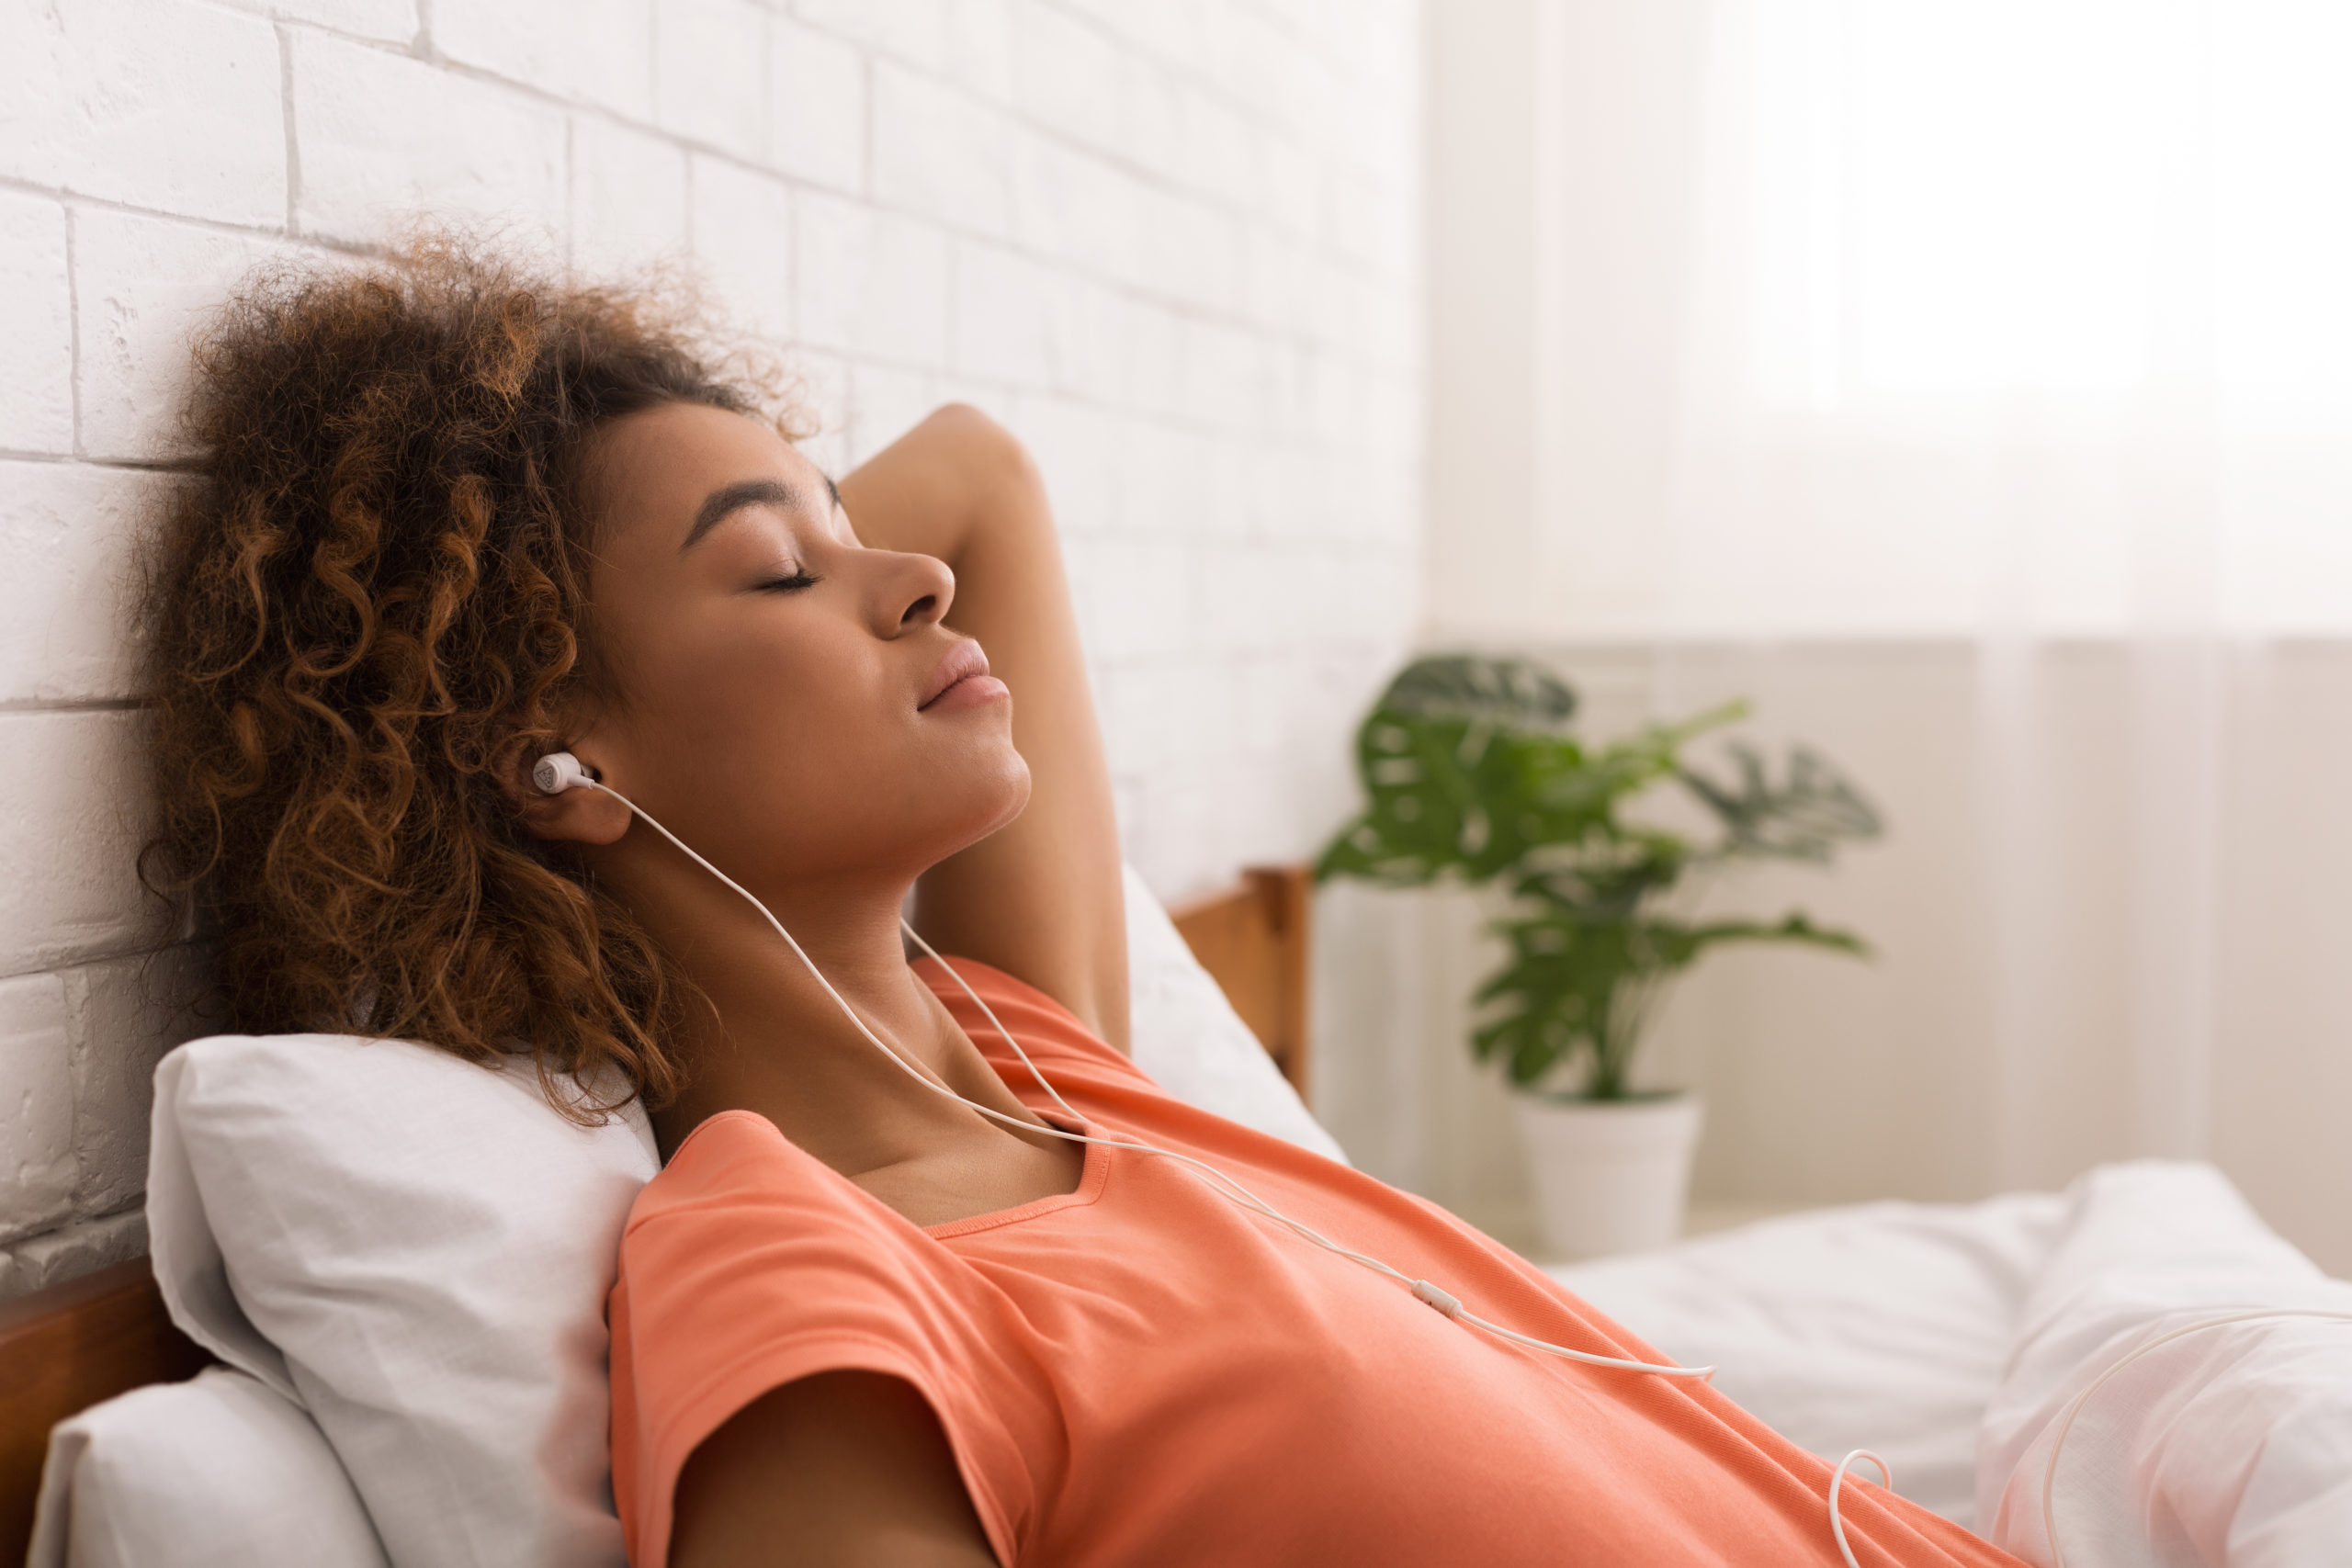 Women relaxes while listening to music.